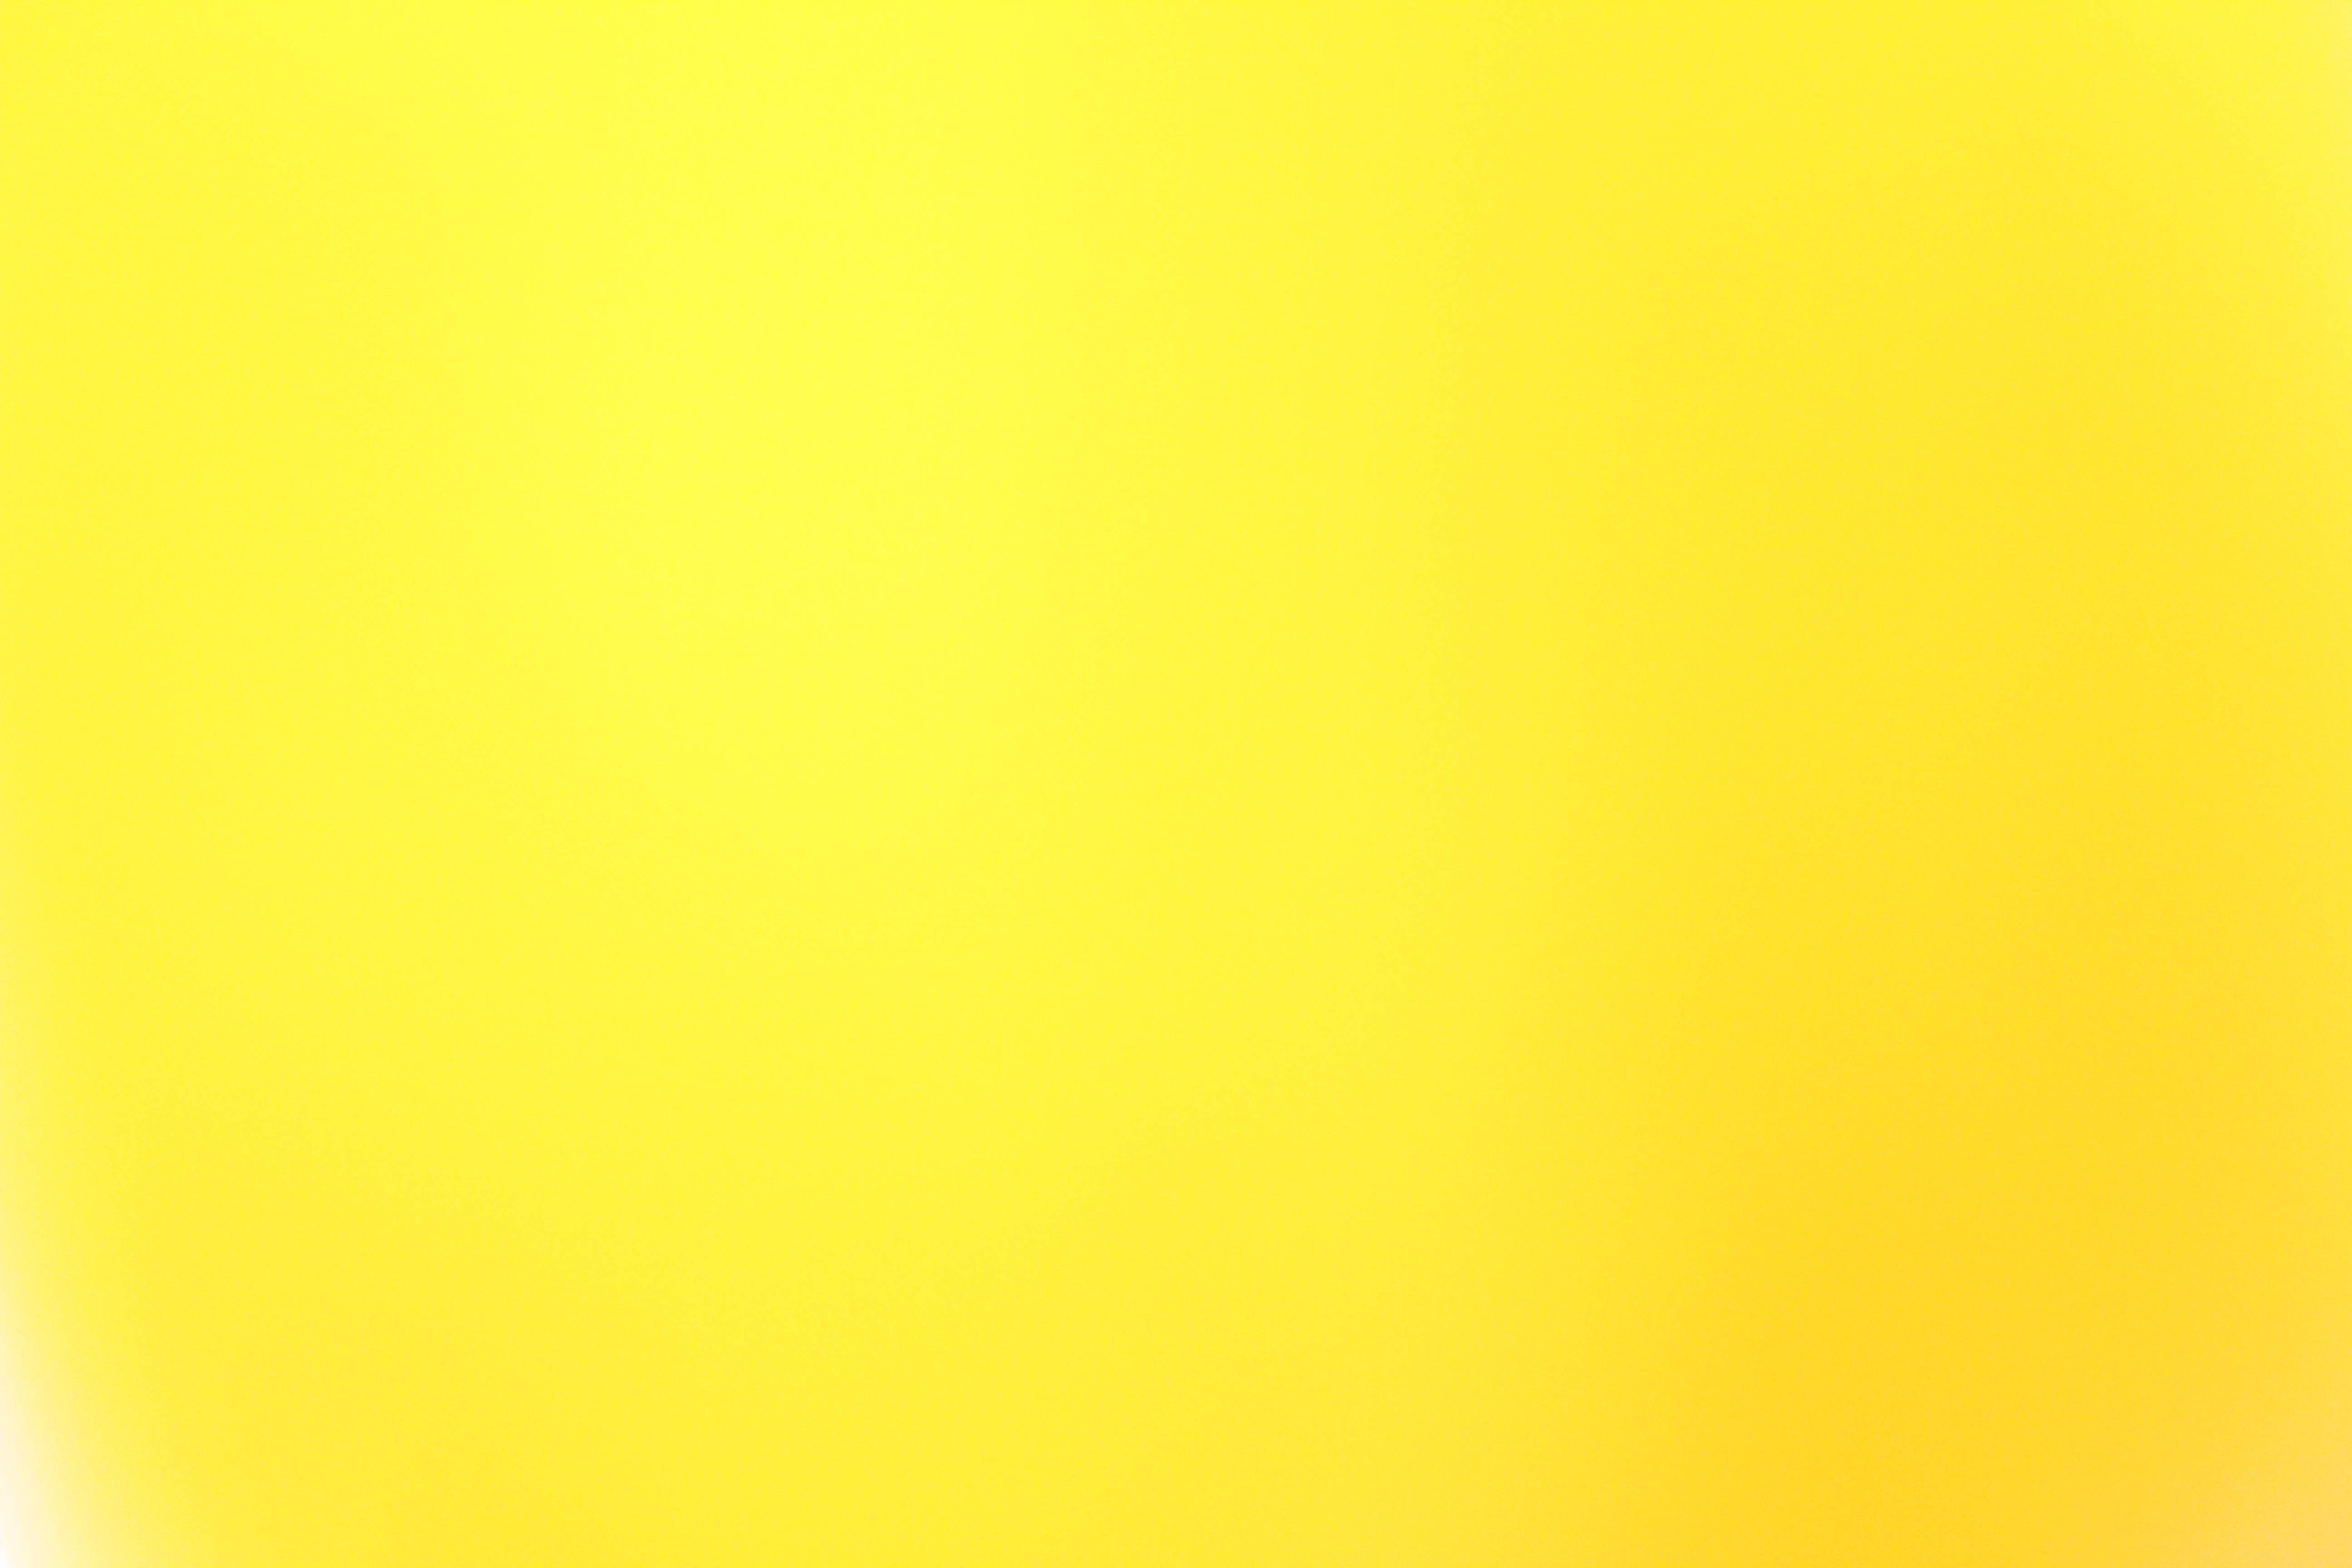 Yellow Background Vectors Photo and PSD files Free Download